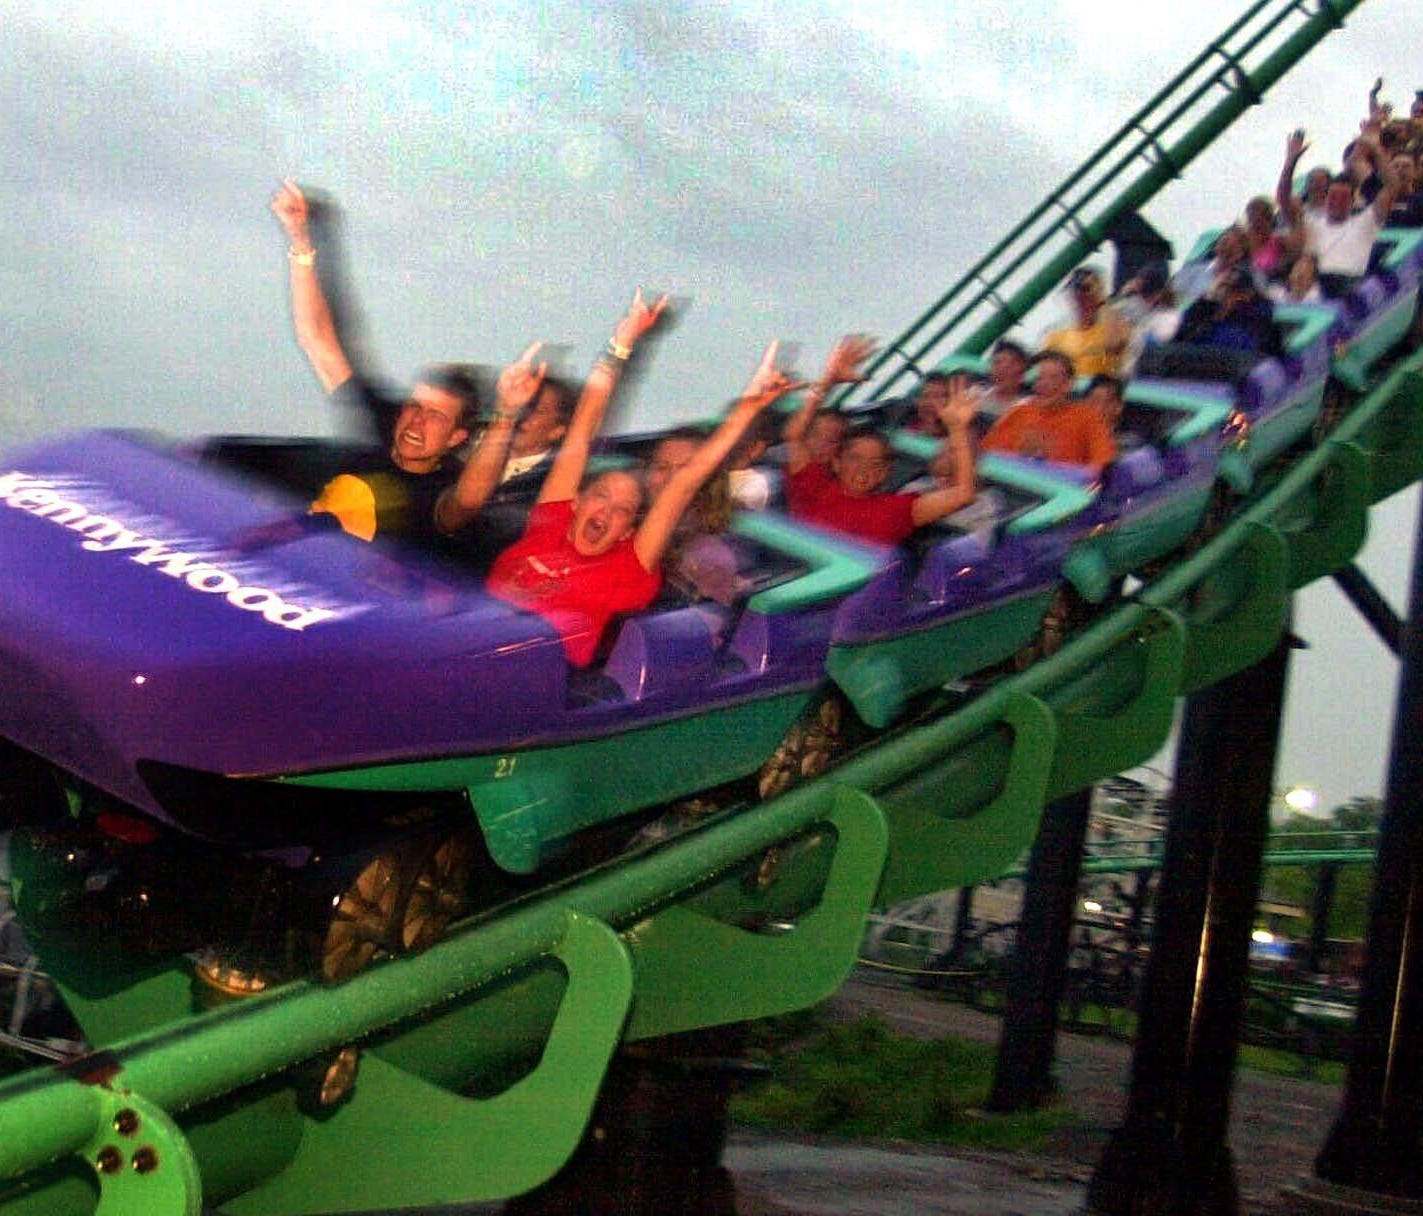 Amusement park visitors ride the Phantom's Revenge coaster at Kennywood Park in West Mifflin, Pa., in 2001.